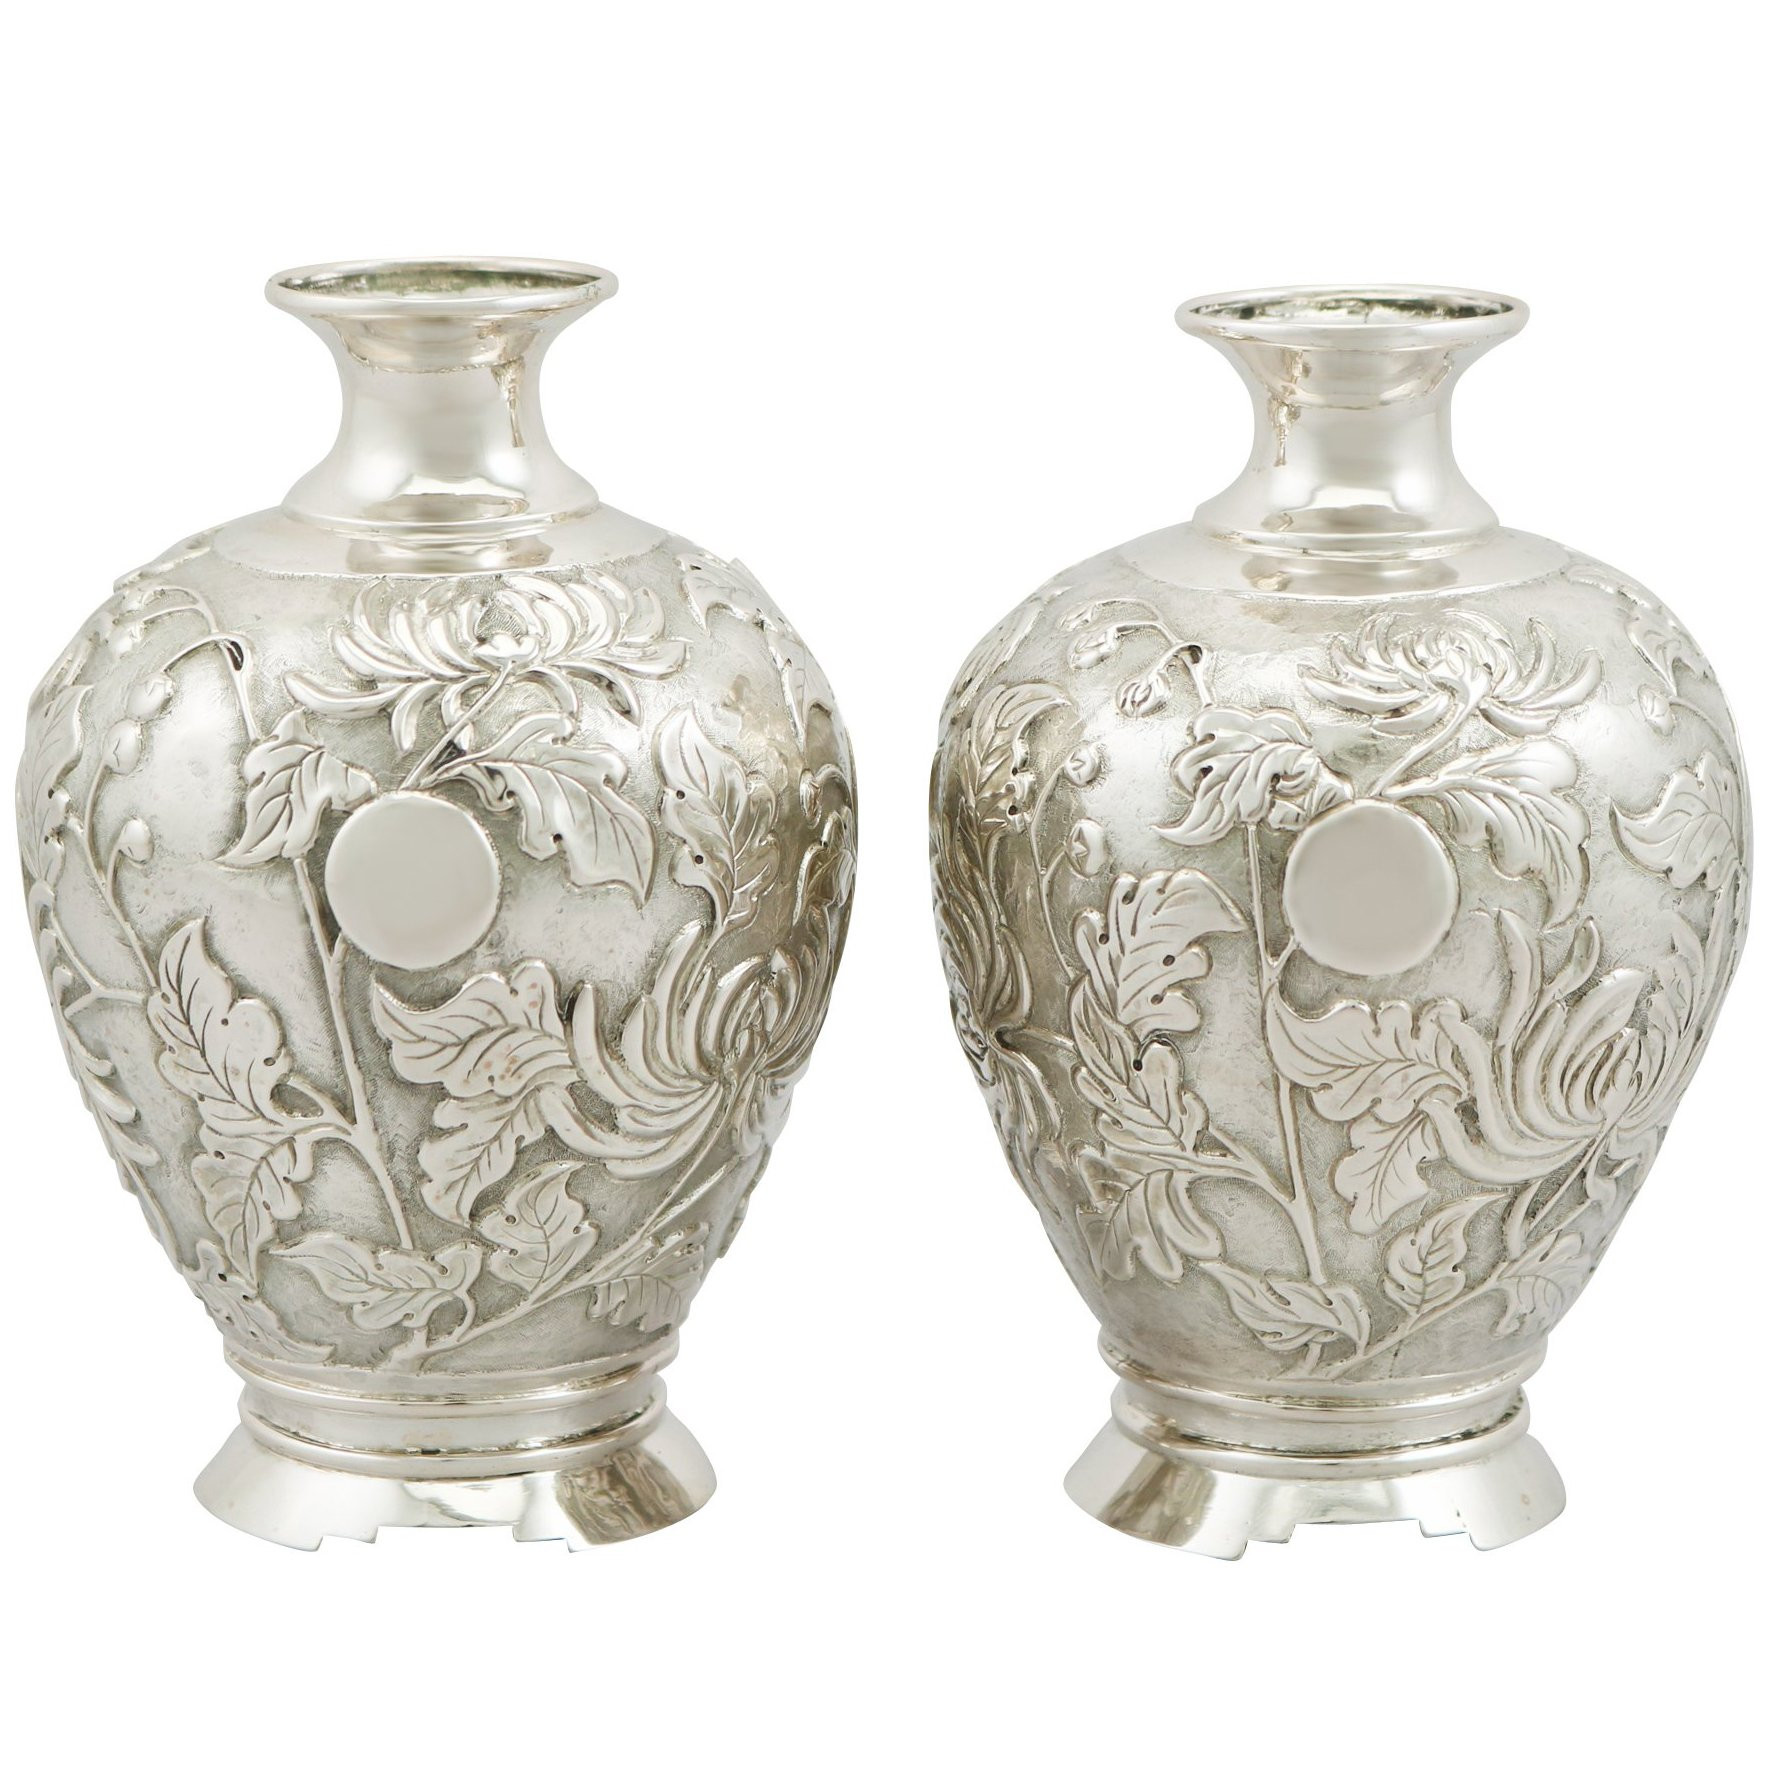 22 Fabulous Connected Glass Bud Vases 2024 free download connected glass bud vases of achaemenid revival repoussa silver vase persia circa 1900 for sale within achaemenid revival repoussa silver vase persia circa 1900 for sale at 1stdibs